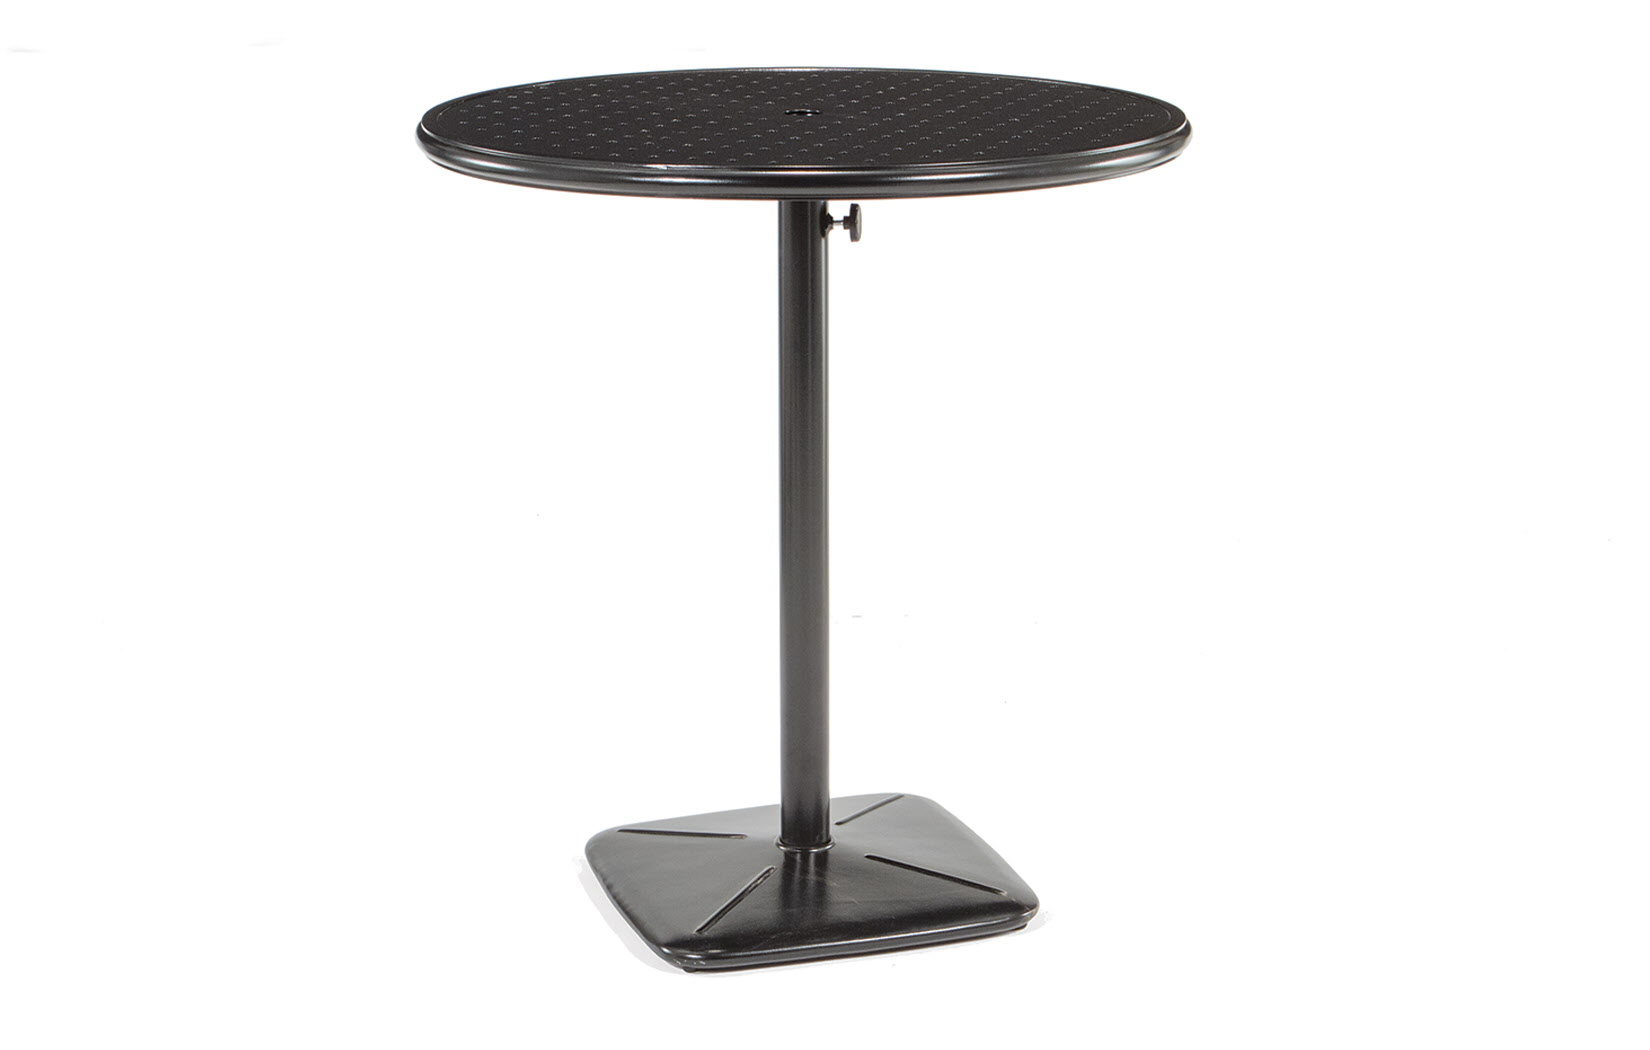 Stamped Aluminum Top 36 Inch Round Bar Table